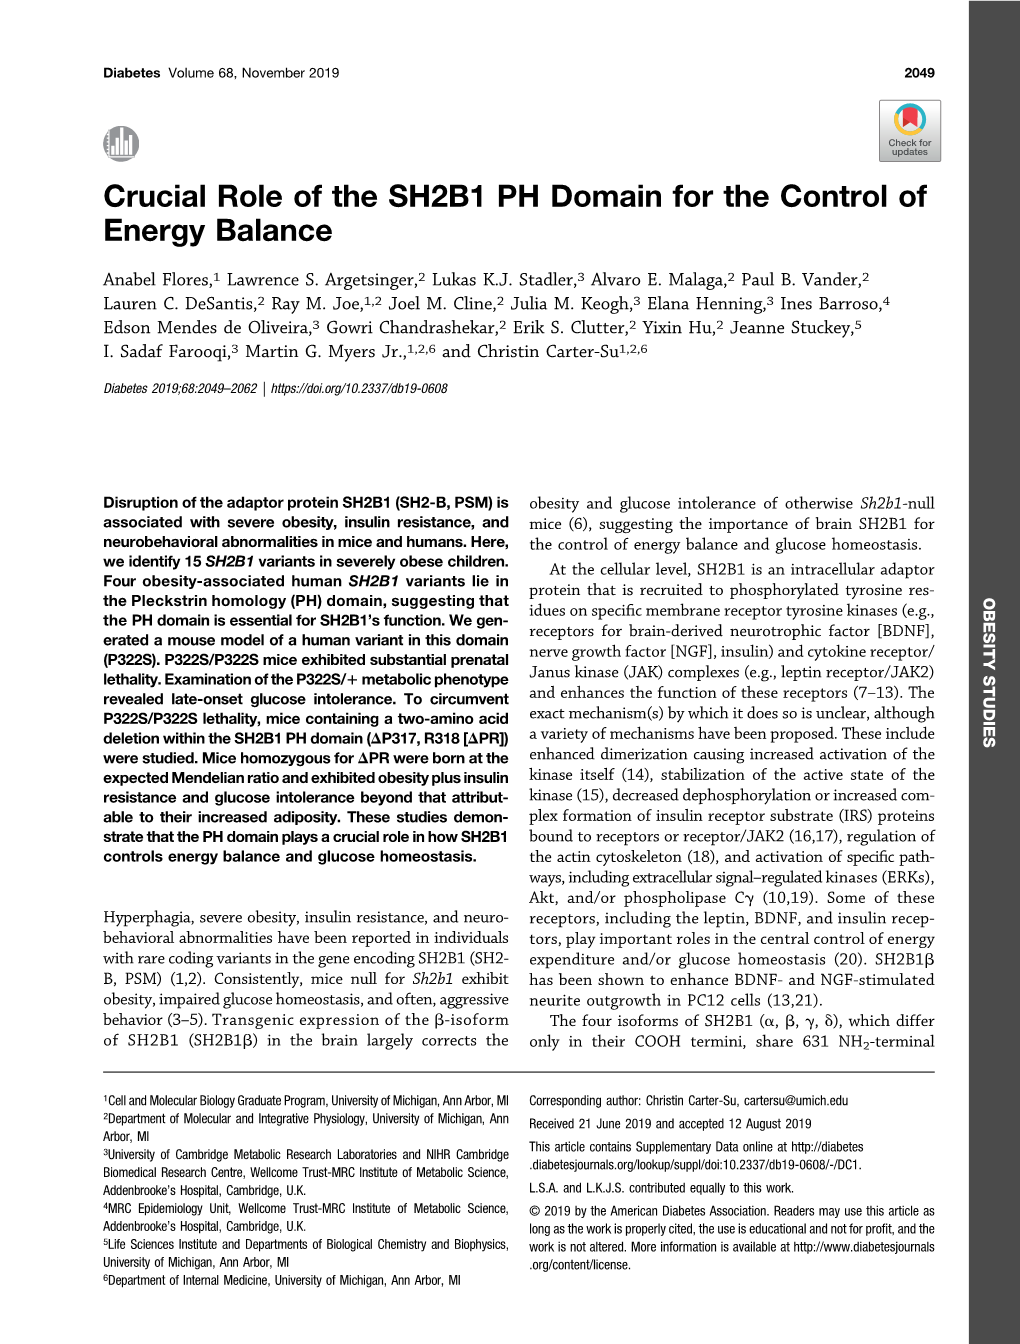 Crucial Role of the SH2B1 PH Domain for the Control of Energy Balance